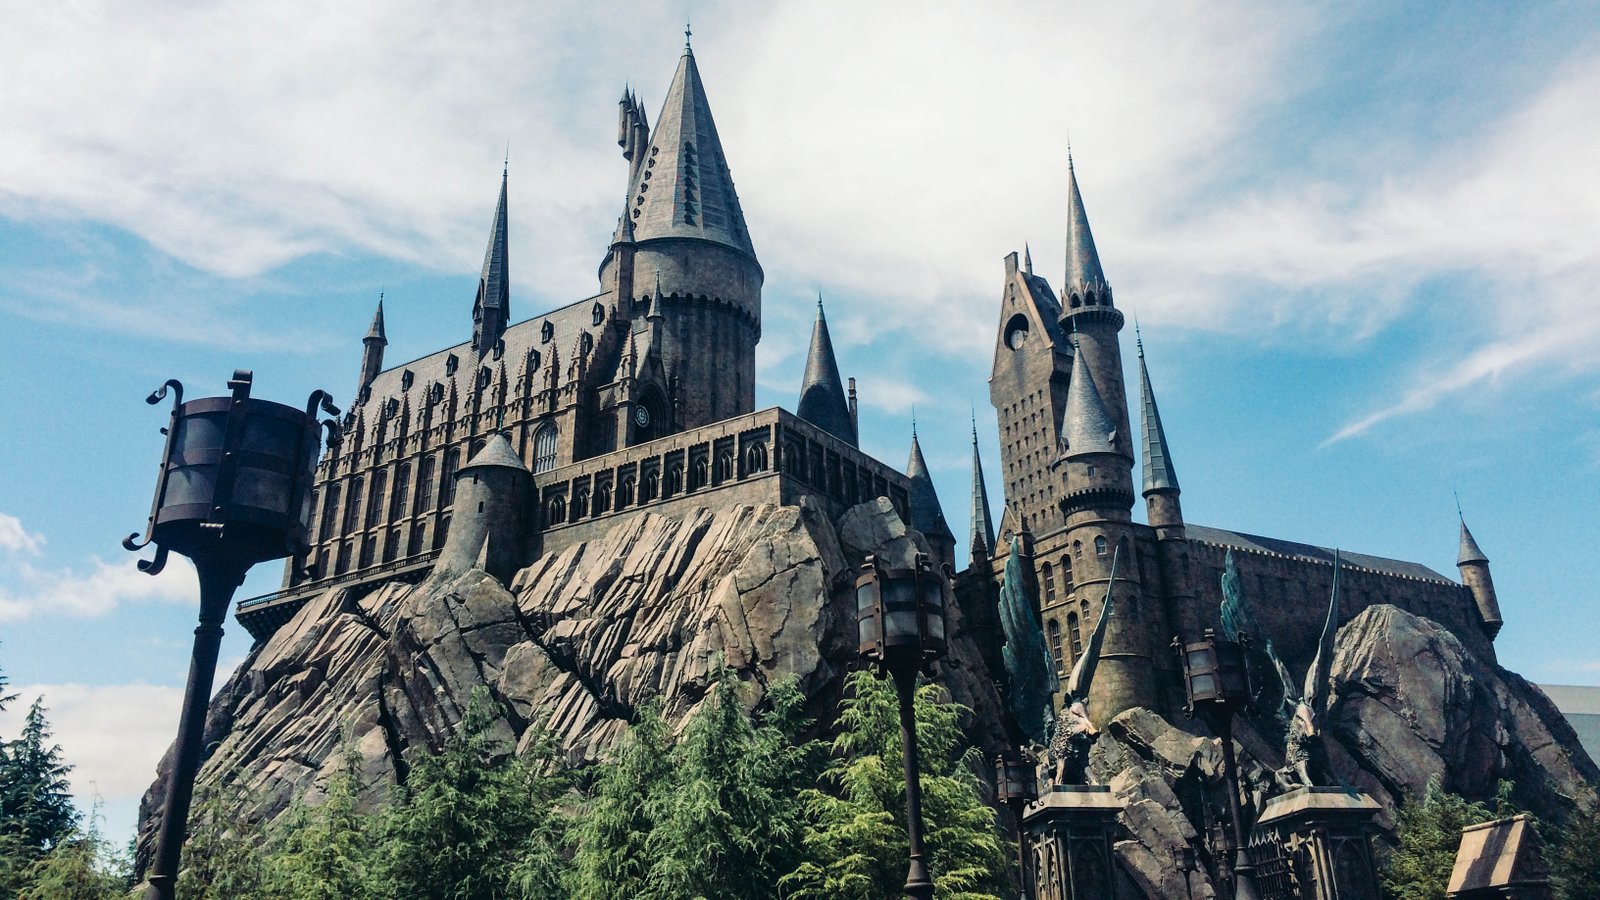 With A Sorting Hat Ceremony And More, This 9-Day Harry Potter Workshop Is Every Potterhead’s Dream!